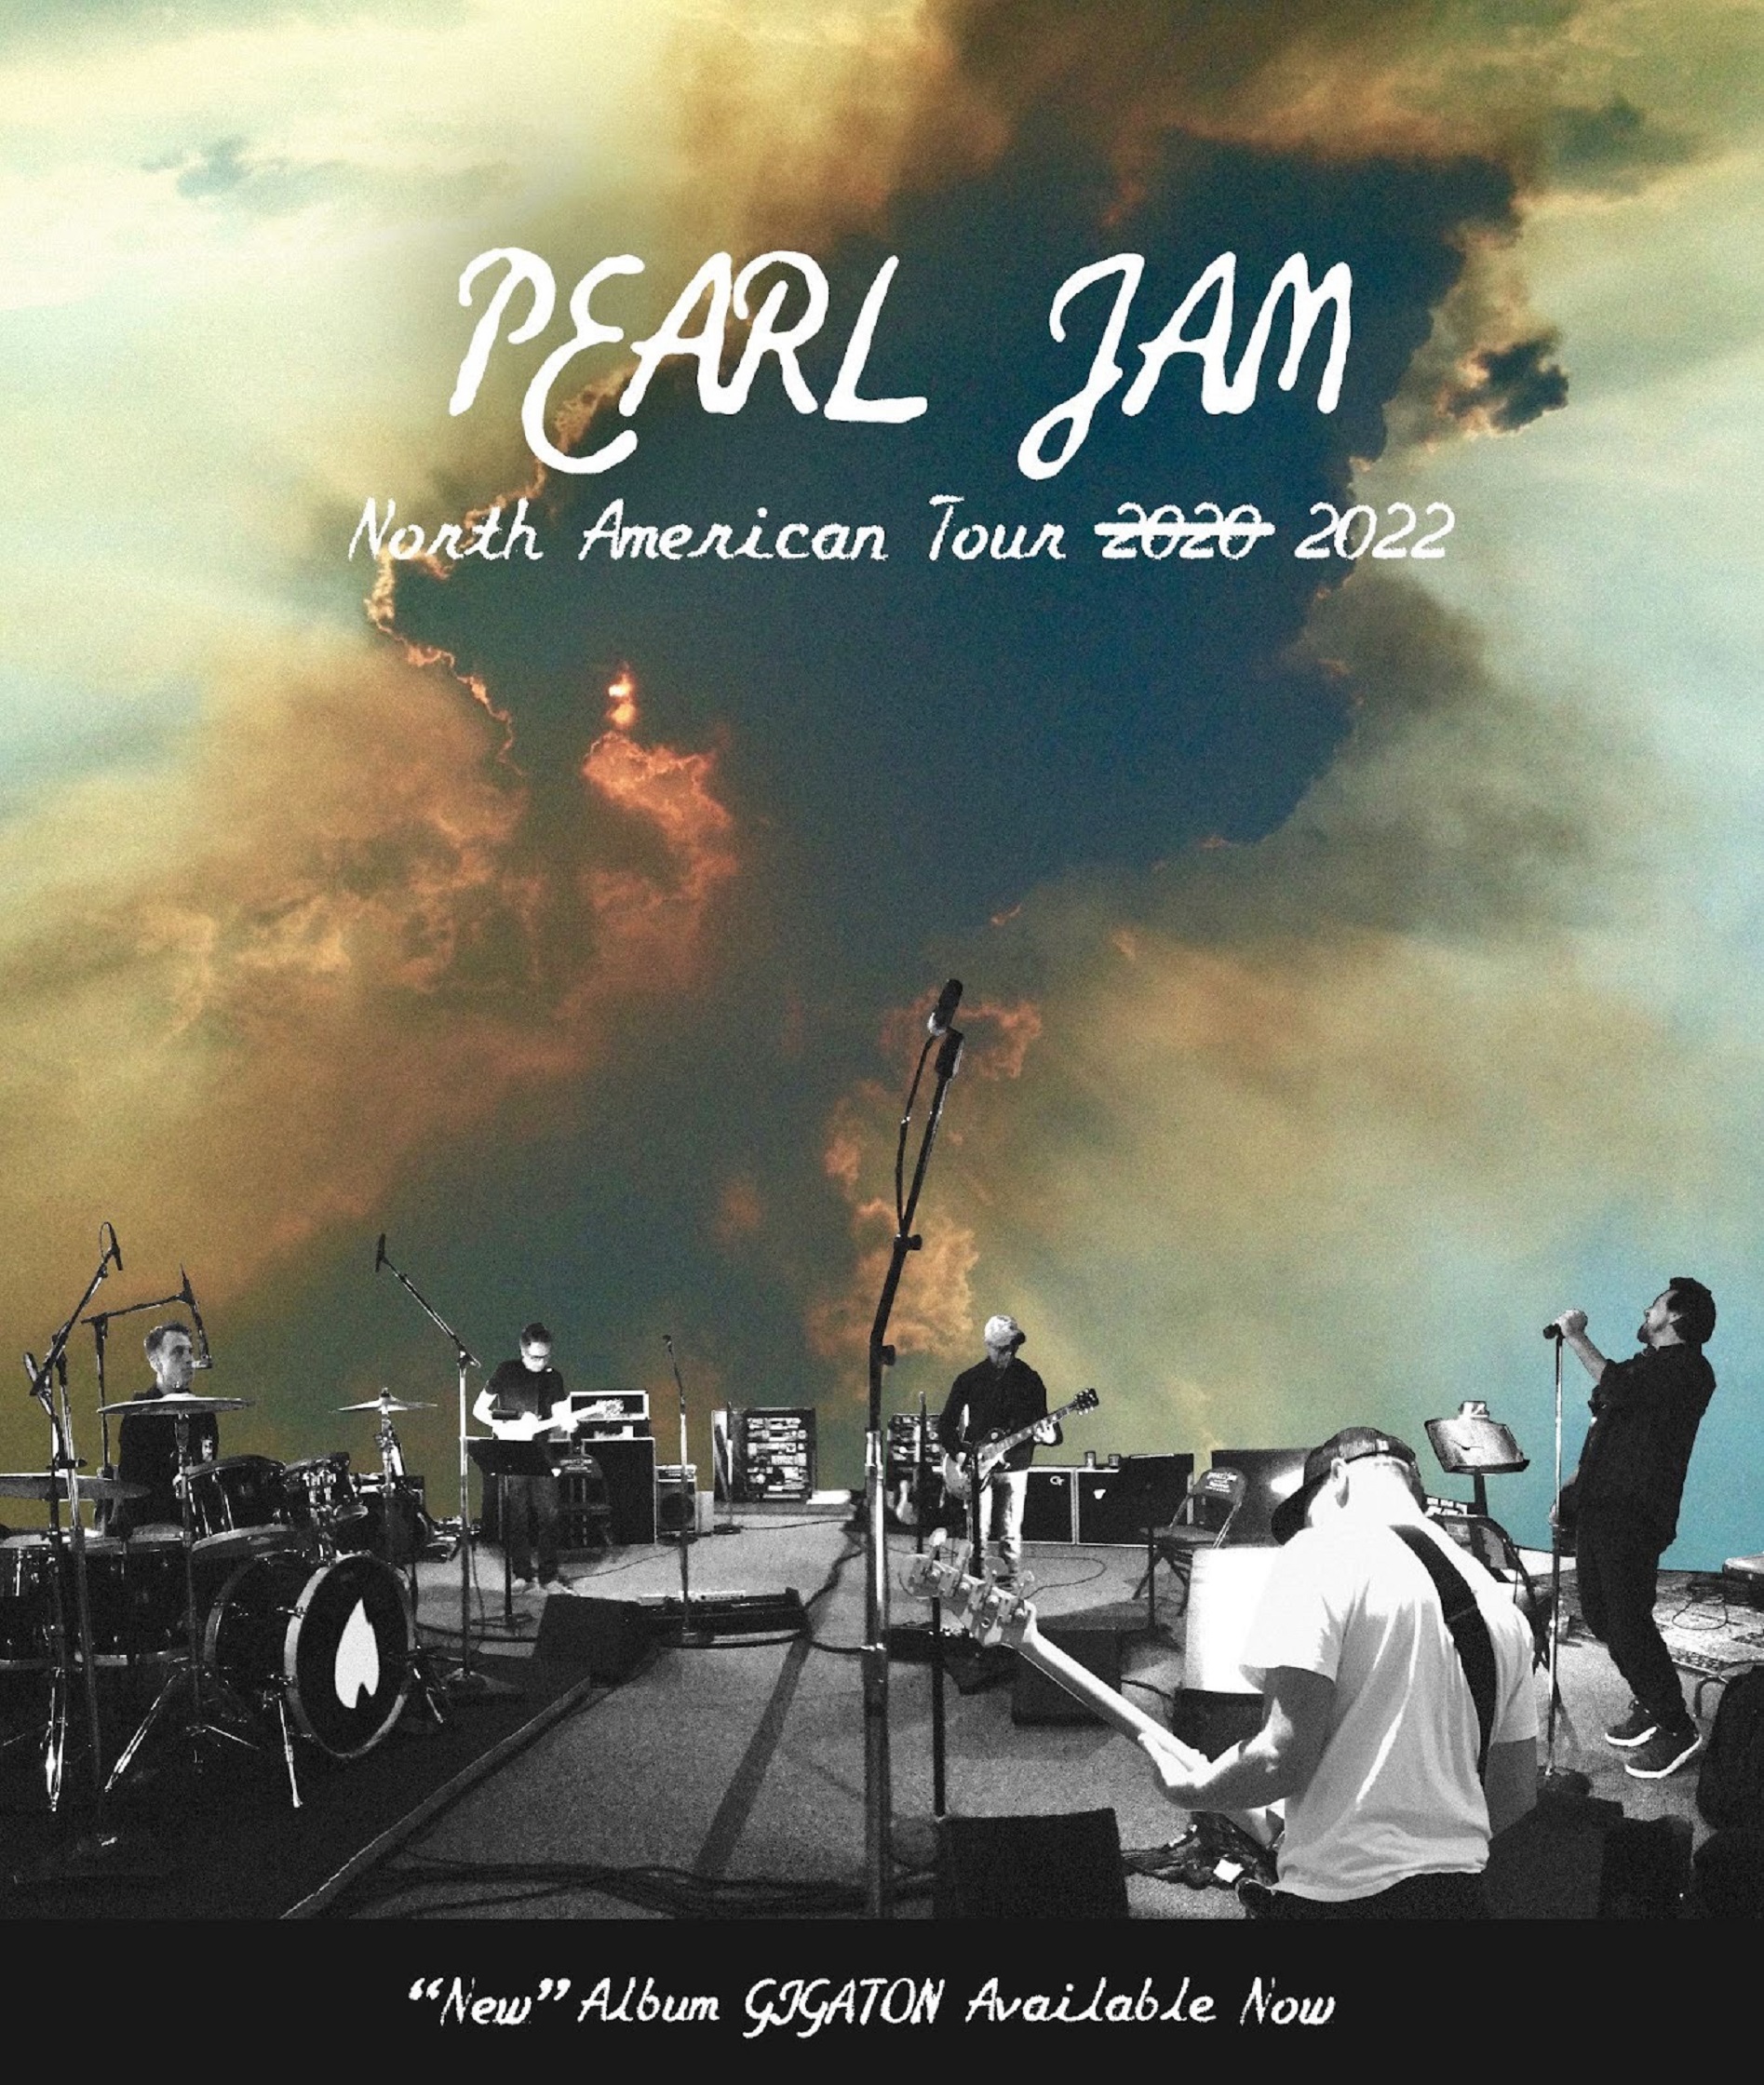 Pearl Jam Rescheduled 2022 North American Tour Dates